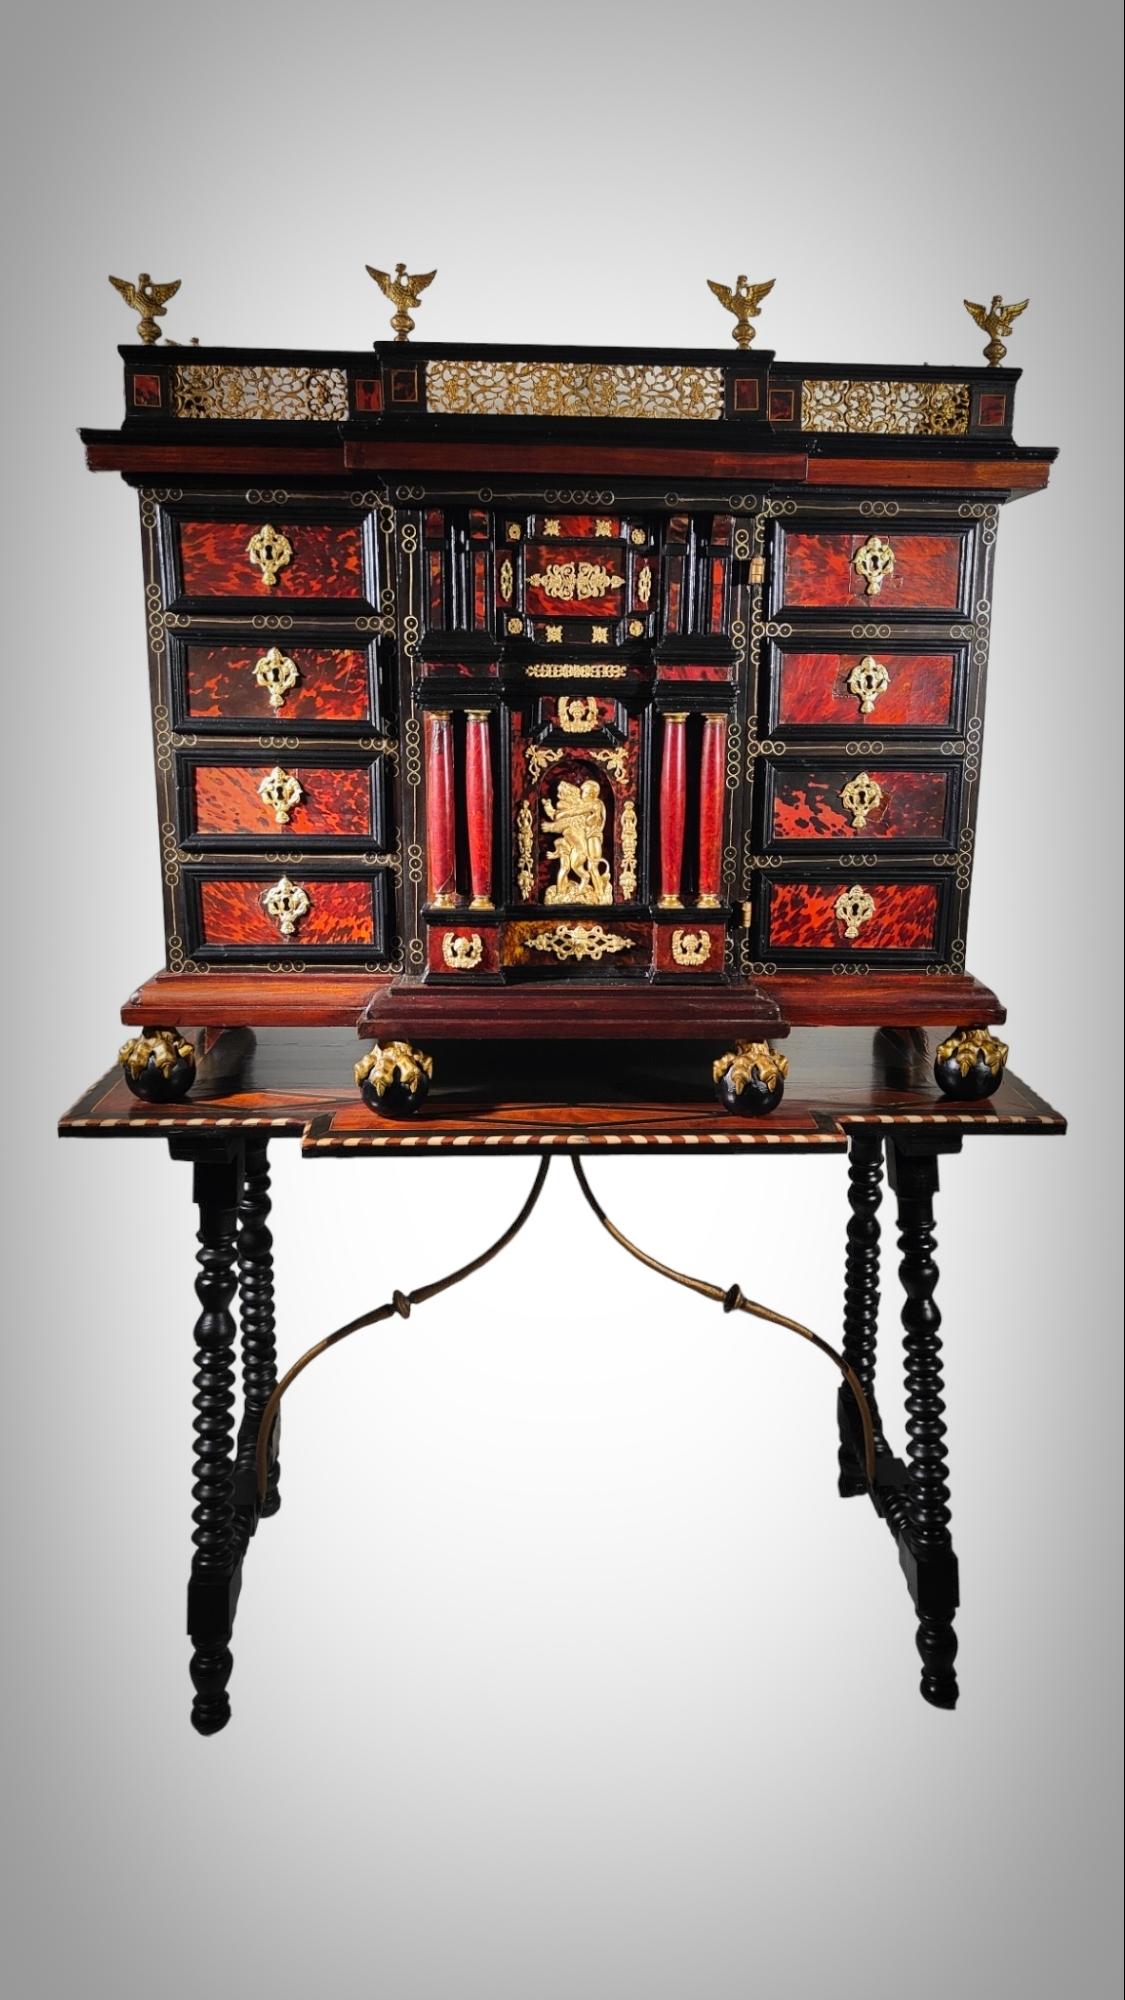 Italian Cabinet With Table, Late Seventeenth Century
Italian Cabinet of exposed sample, with prismatic structure and carved feet, in the shape of a bird's claw synthesized on a ball, a very typical shape of the seventeenth century cabinet.
 The